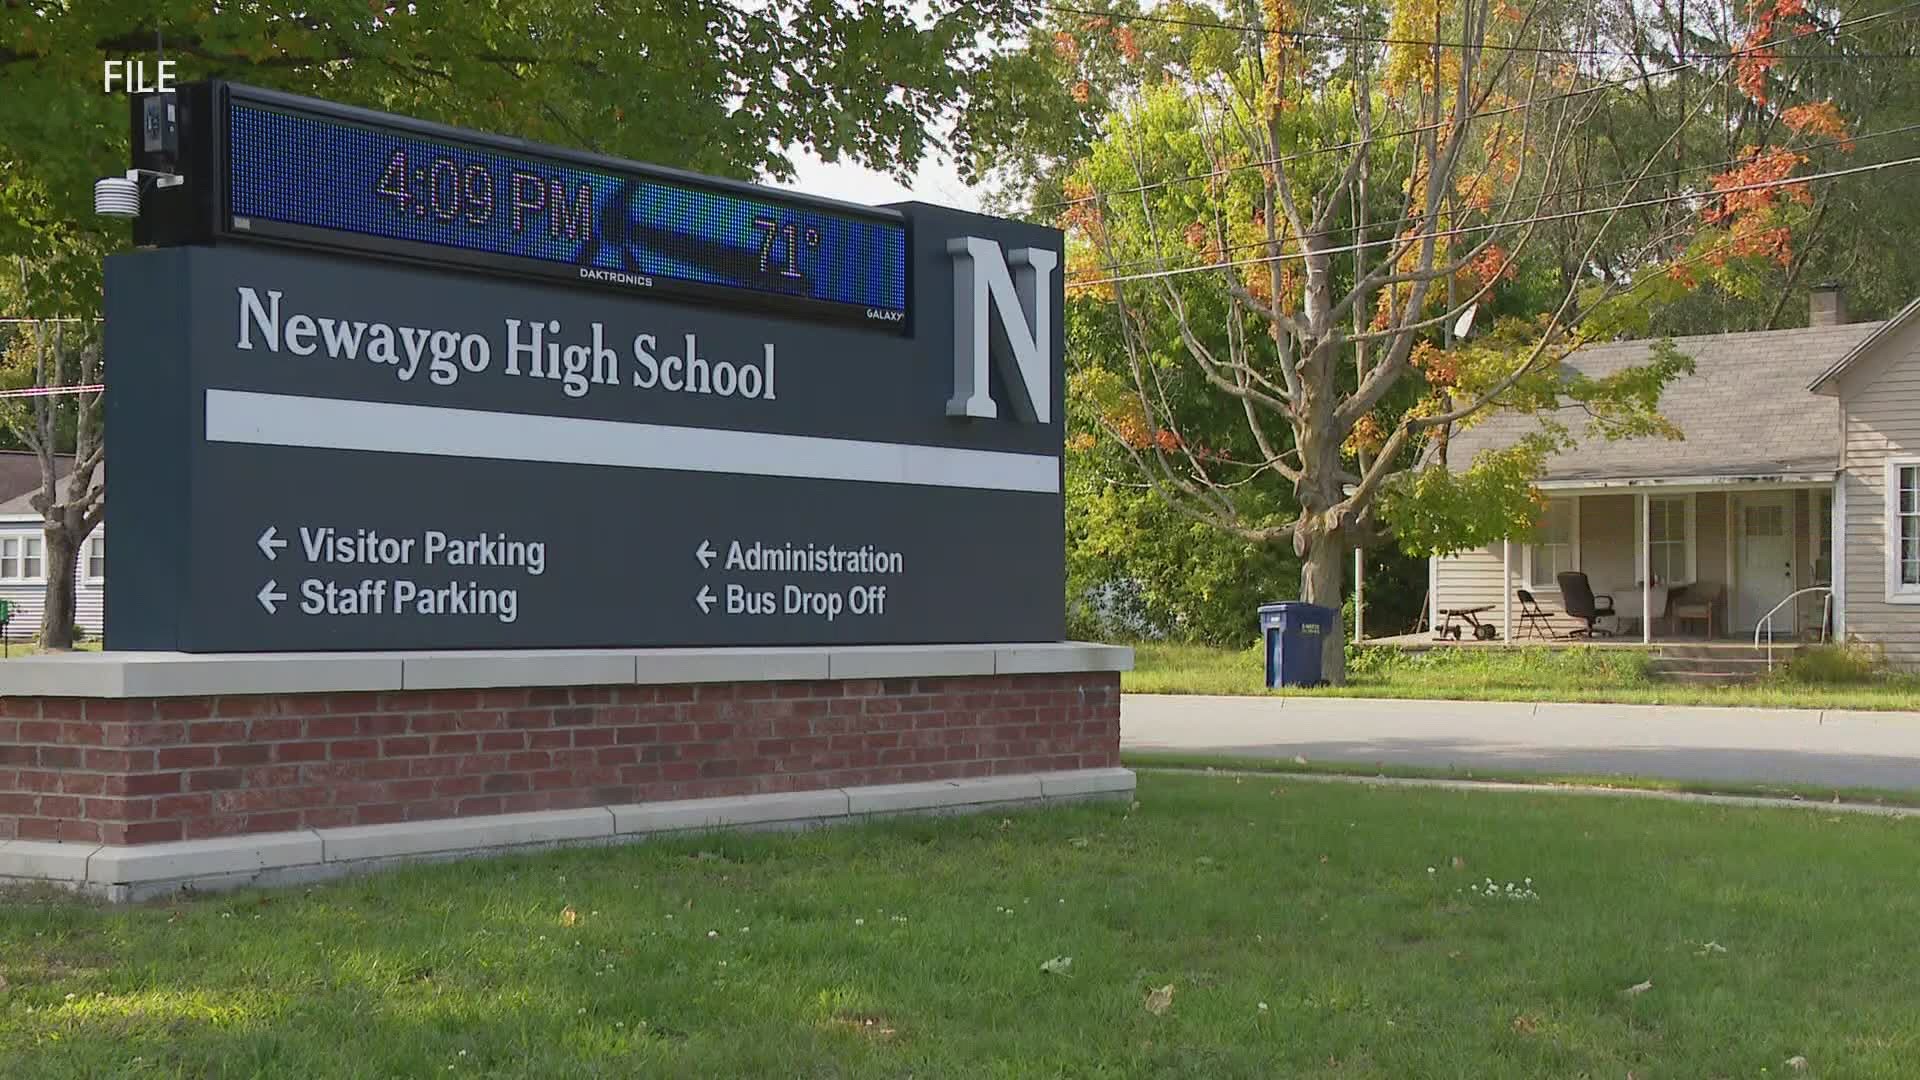 Michigan State Police continues to investigate after an explosive device was "accidentally" detonated by a student at Newaygo High School this week.